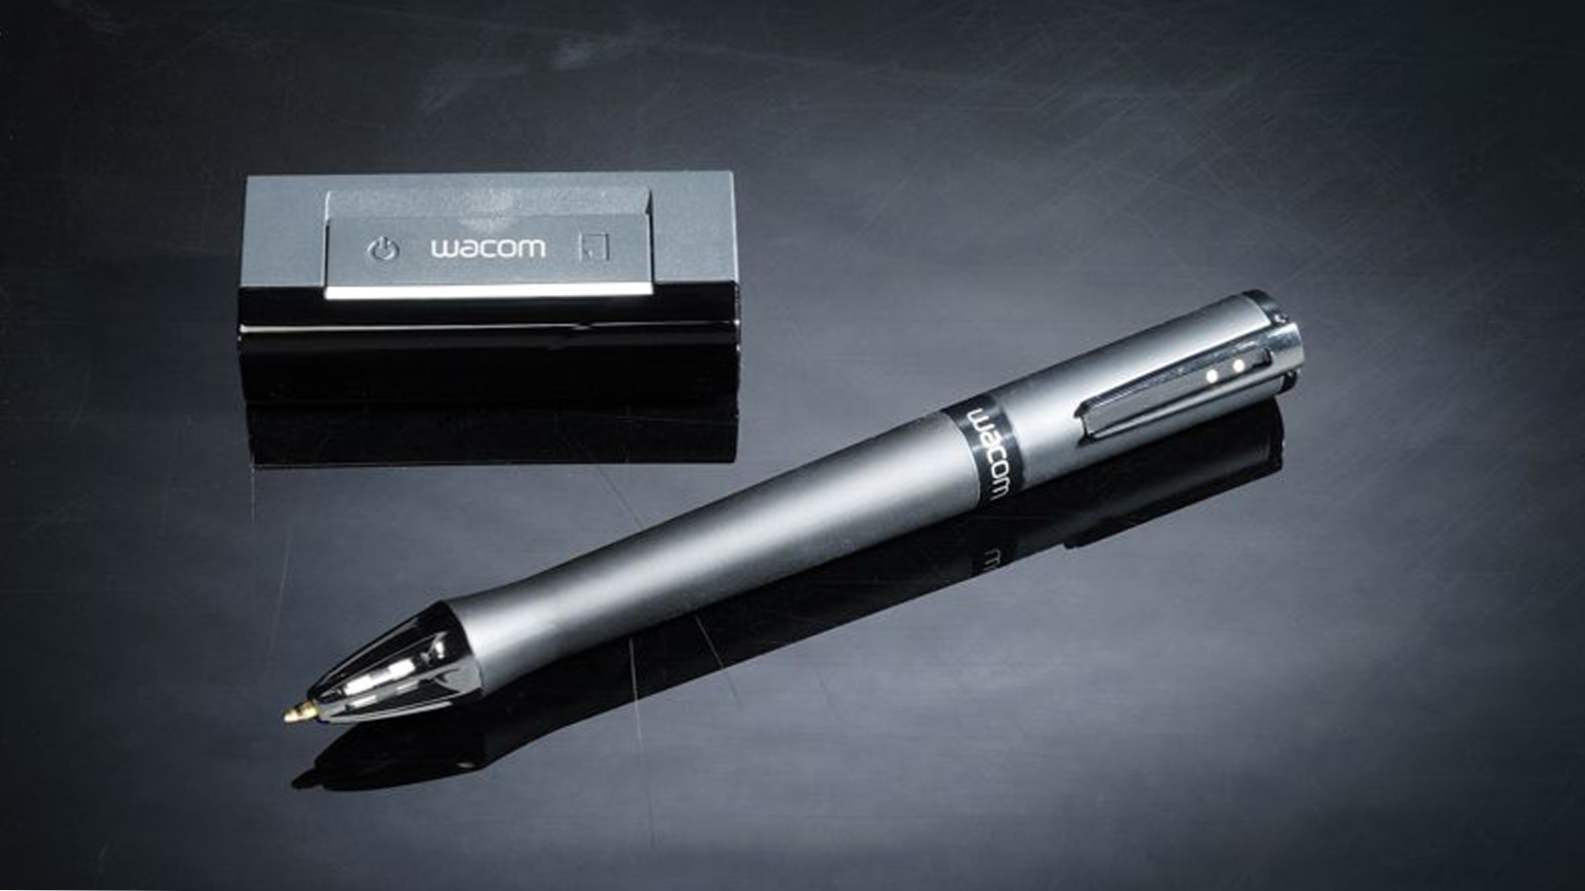 Pen works. ACK-40303, Inkling Replacement Battery, Wacom. How Wacom Pen works. Bonka Pen one. Grip Pen Wacom разборка.